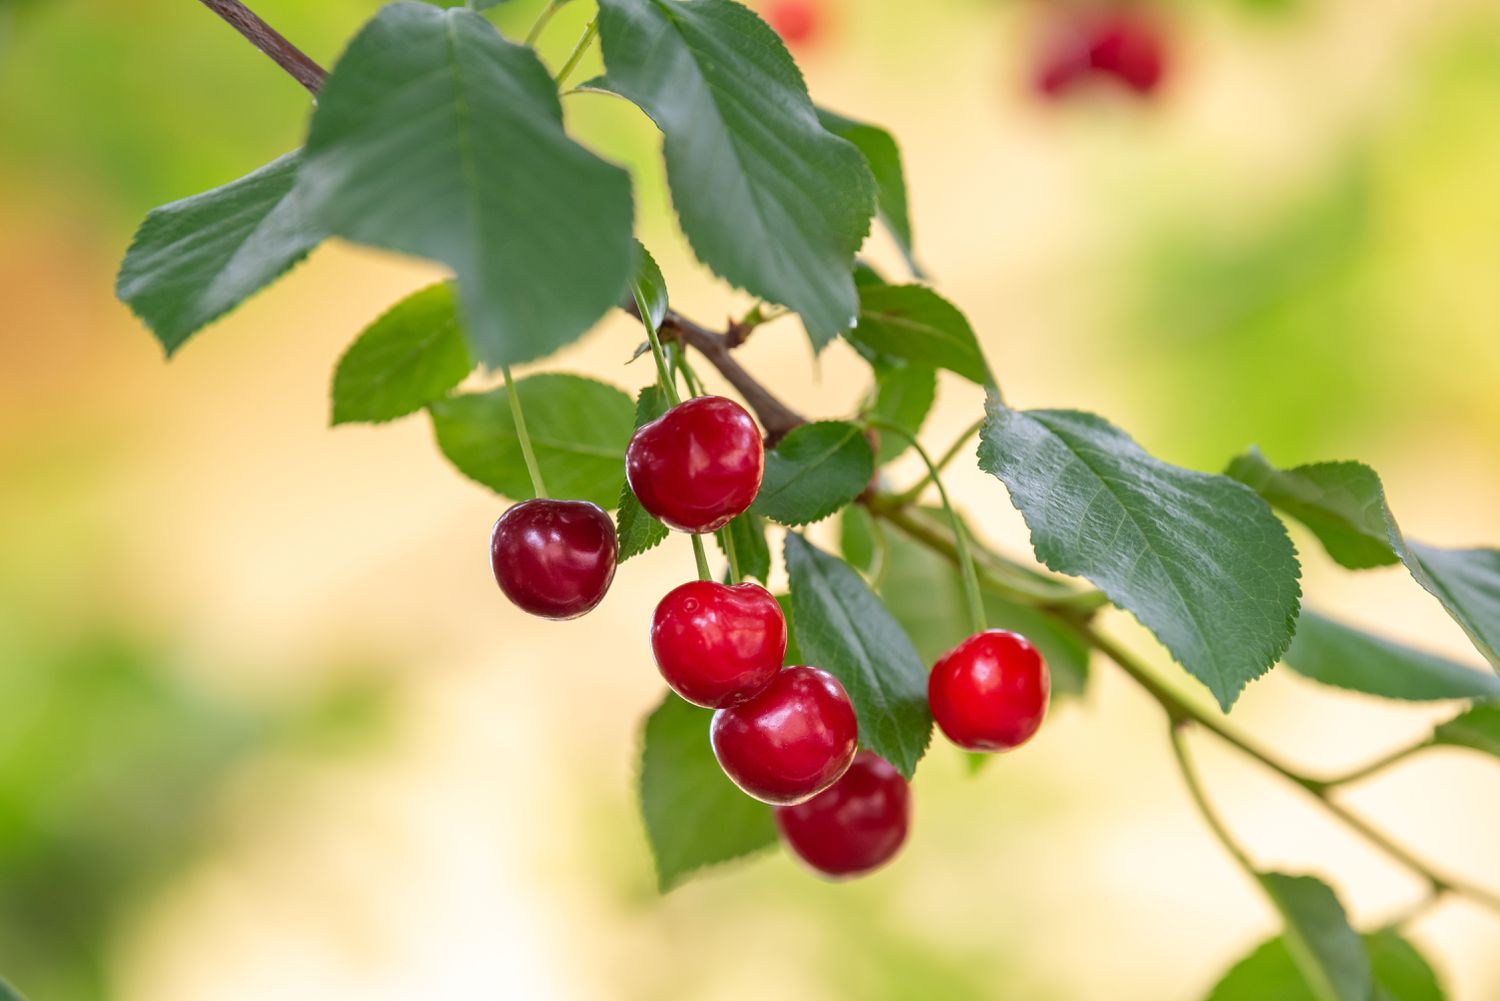 How To Plant A Cherry Tree From Seed